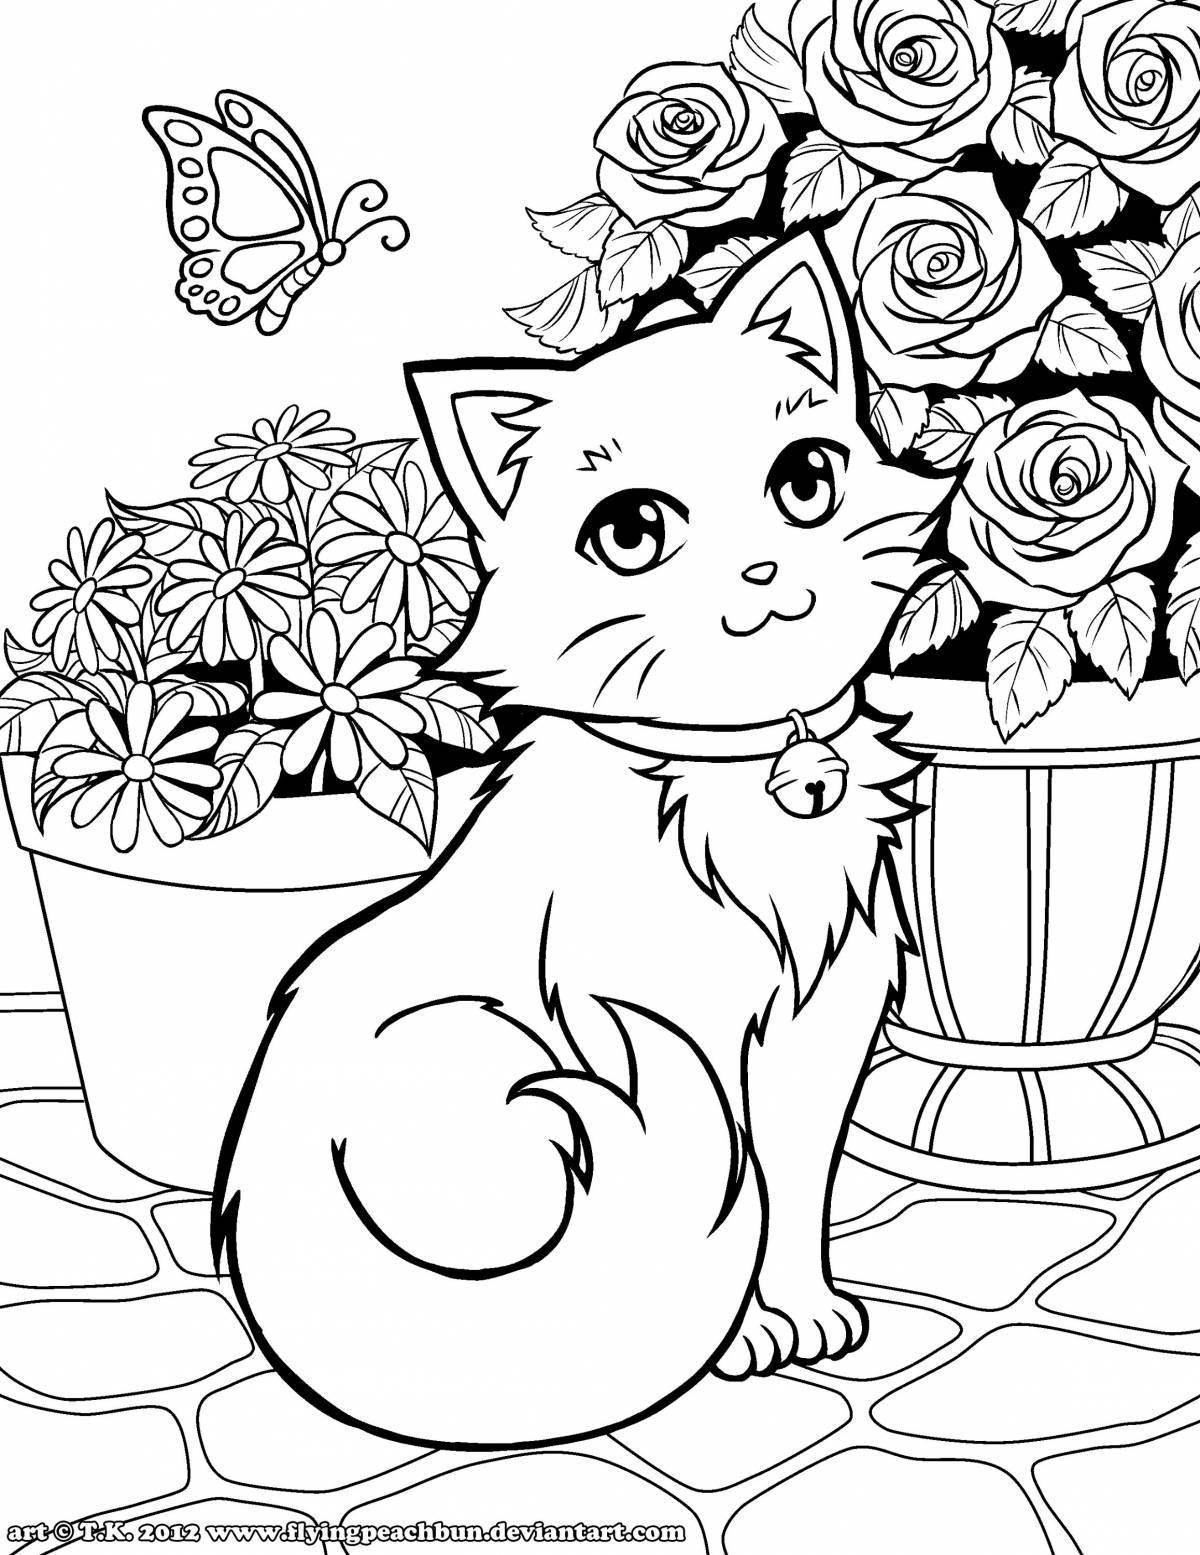 Blessed cat coloring page